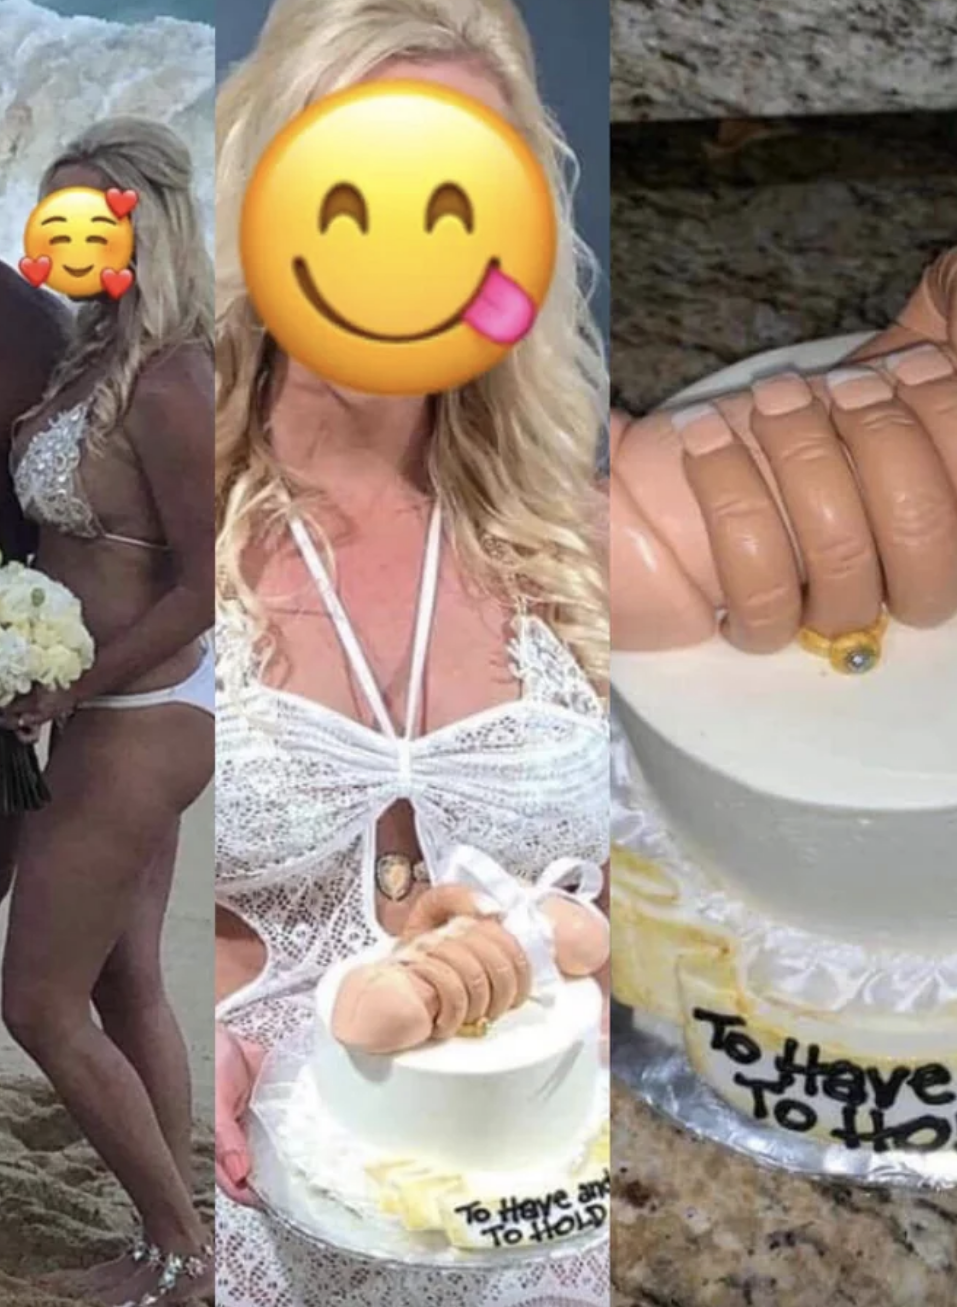 The cake is topped with a penis that has a hand wrapped around it